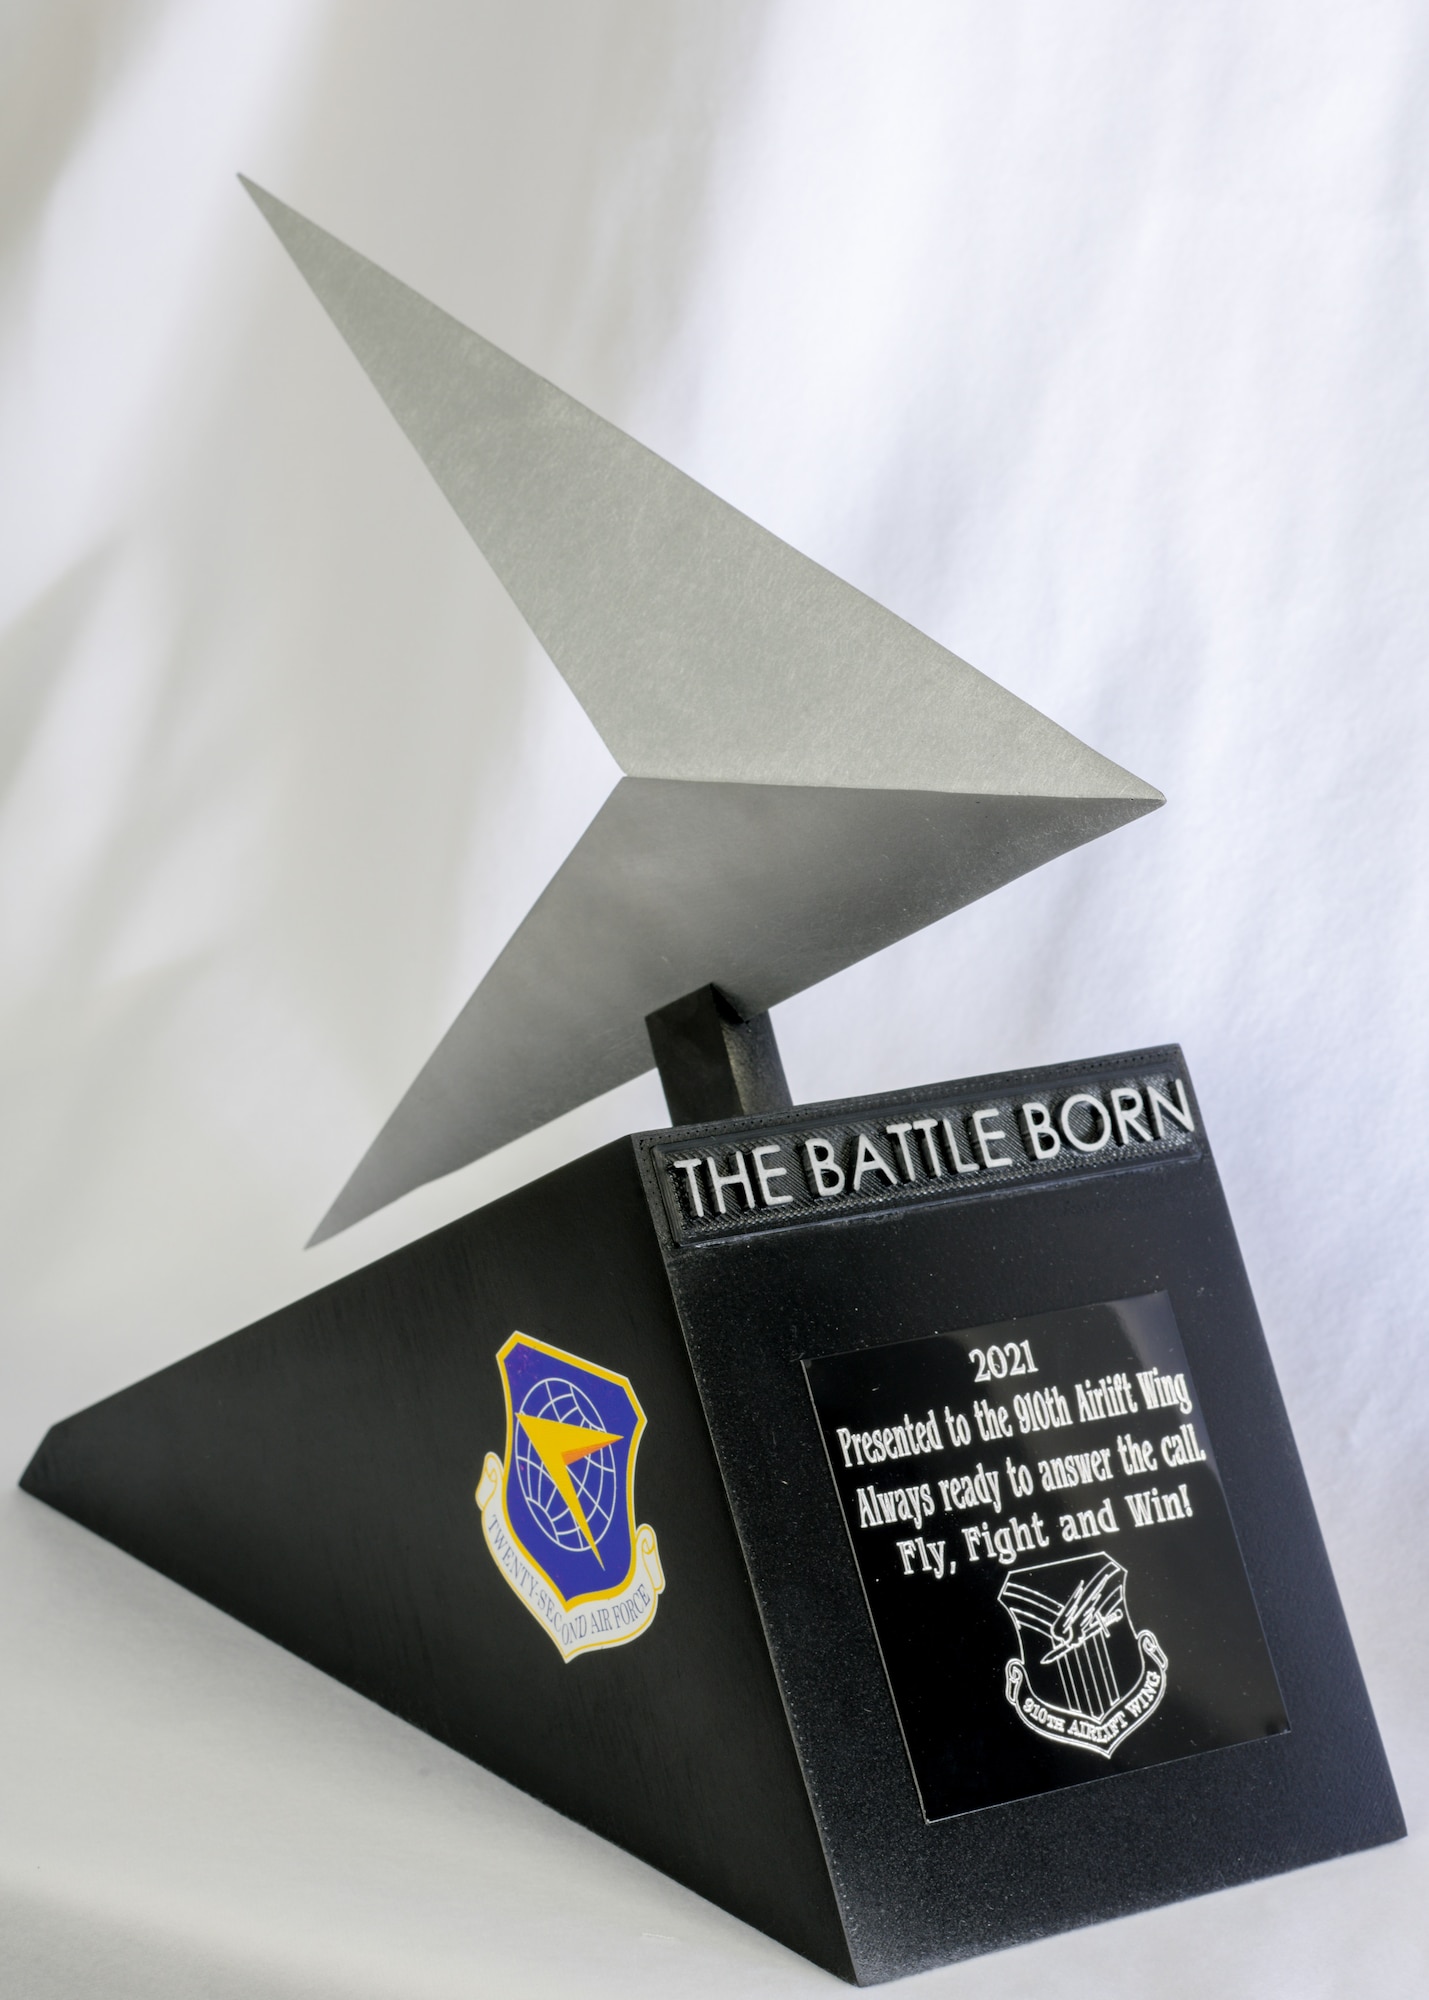 The 910th Aircraft Maintenance Squadron’s fabrication flight was tasked by 22nd Air Force to build the inaugural Battle Born Trophy to be presented to the 22nd AF unit that best represents the commander’s priority of “Readiness Now” during the previous year.